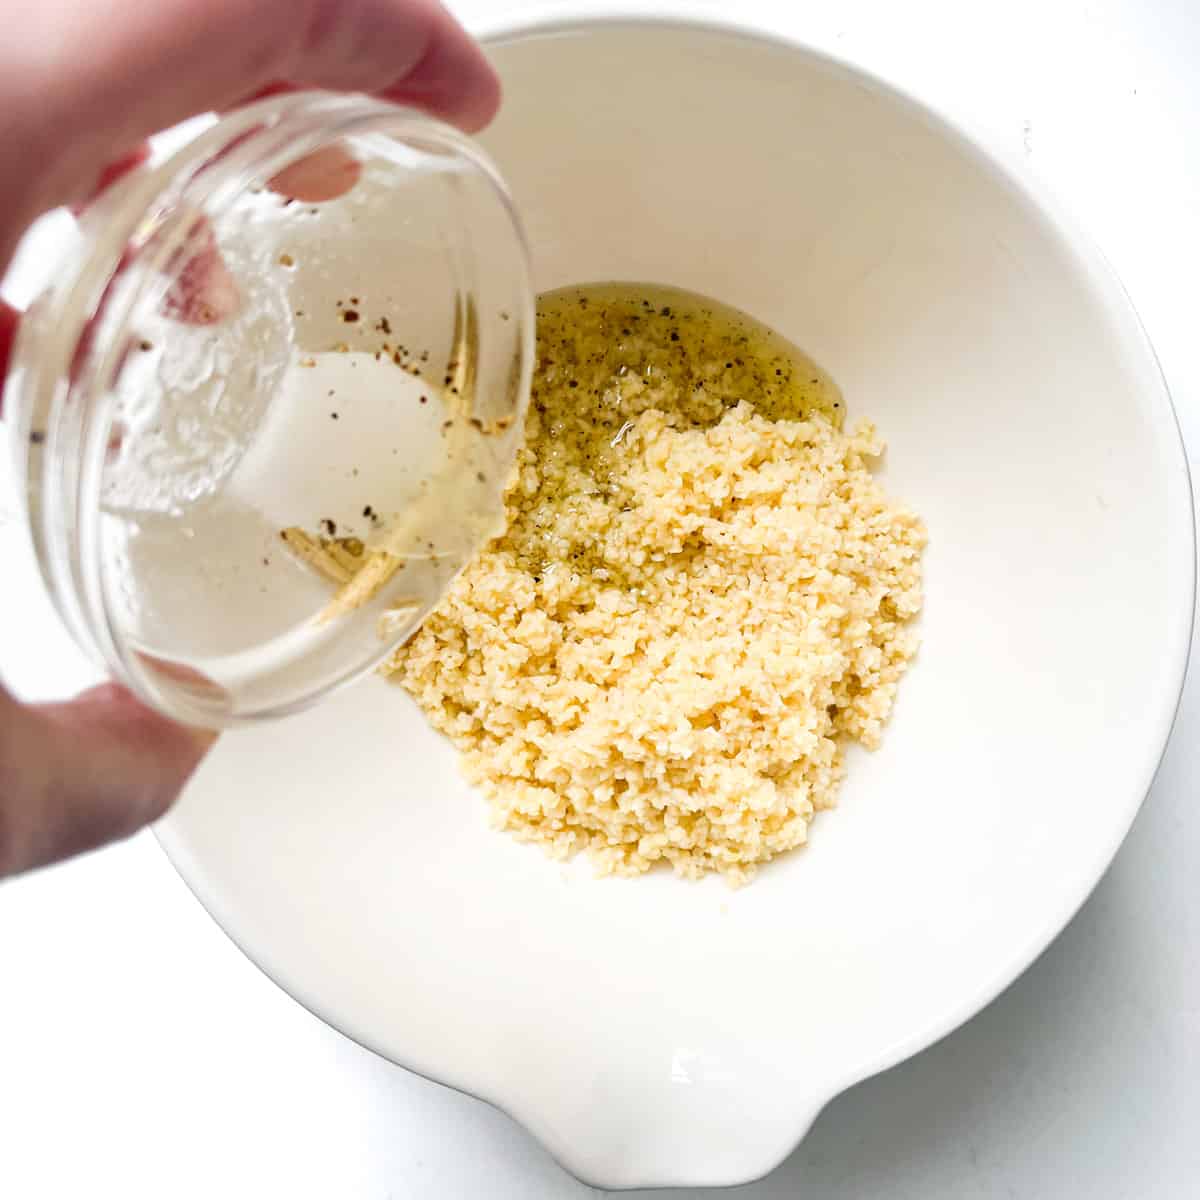 Adding the salad dressing to the bulgur wheat in a large white bowl.